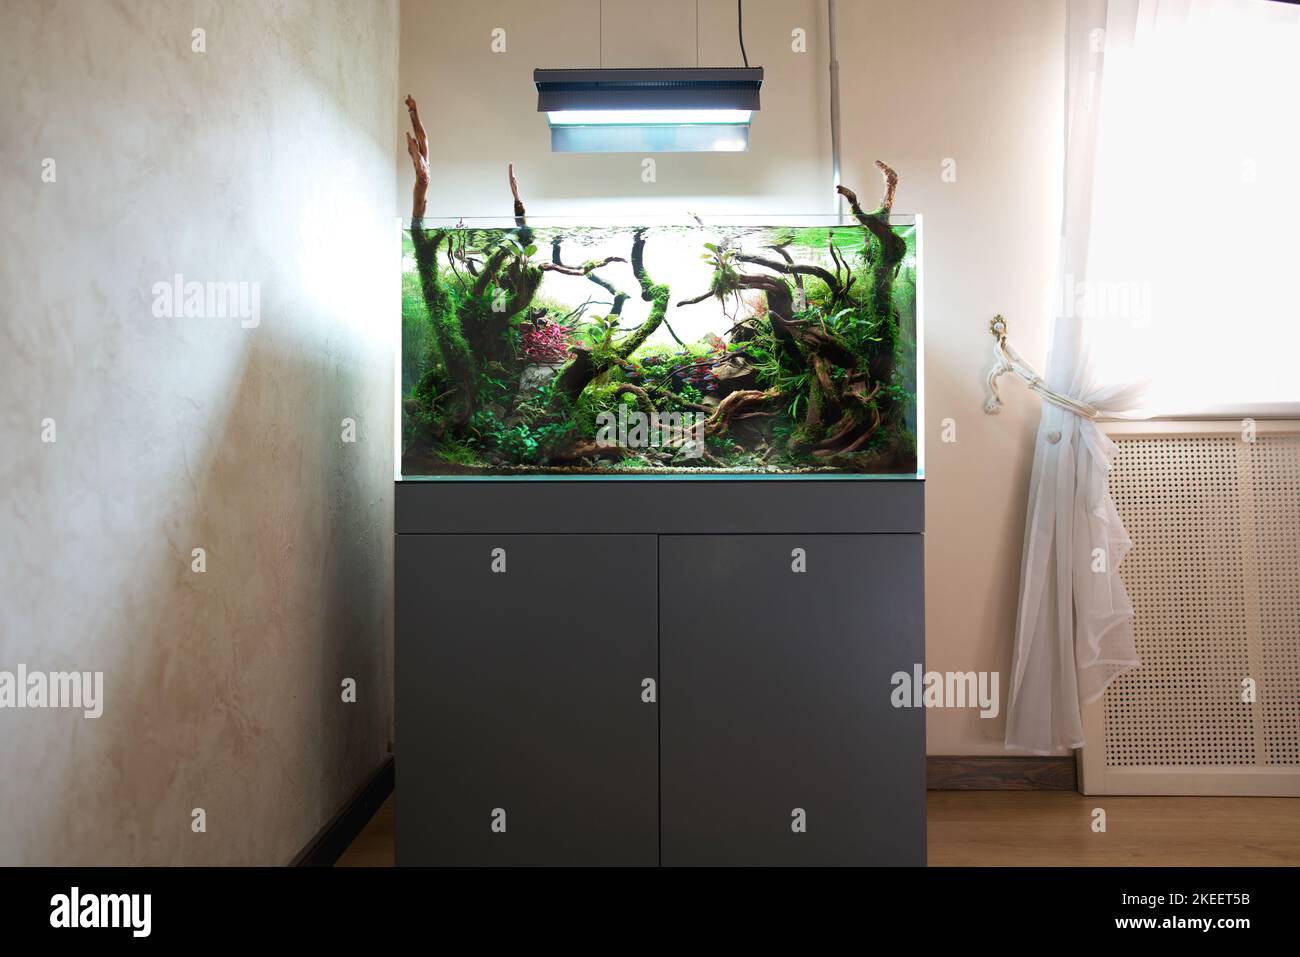 Beautiful freshwater aquascape with live aquarium plants, Frodo stones, redmoor roots covered by java moss and a school of blue neon tetra fish. Standing in room with window and curtain. Stock Photo